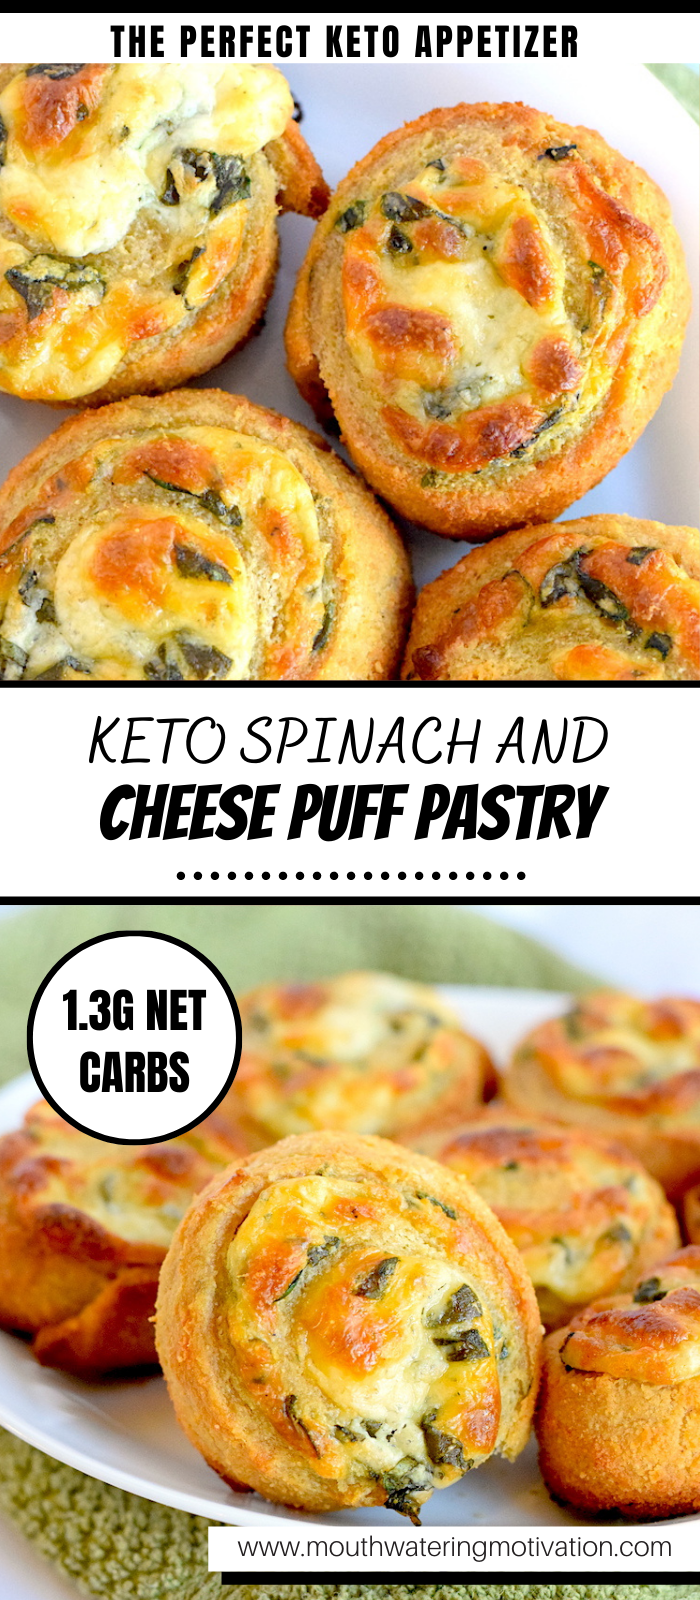 keto spinach and cheese puff pastry